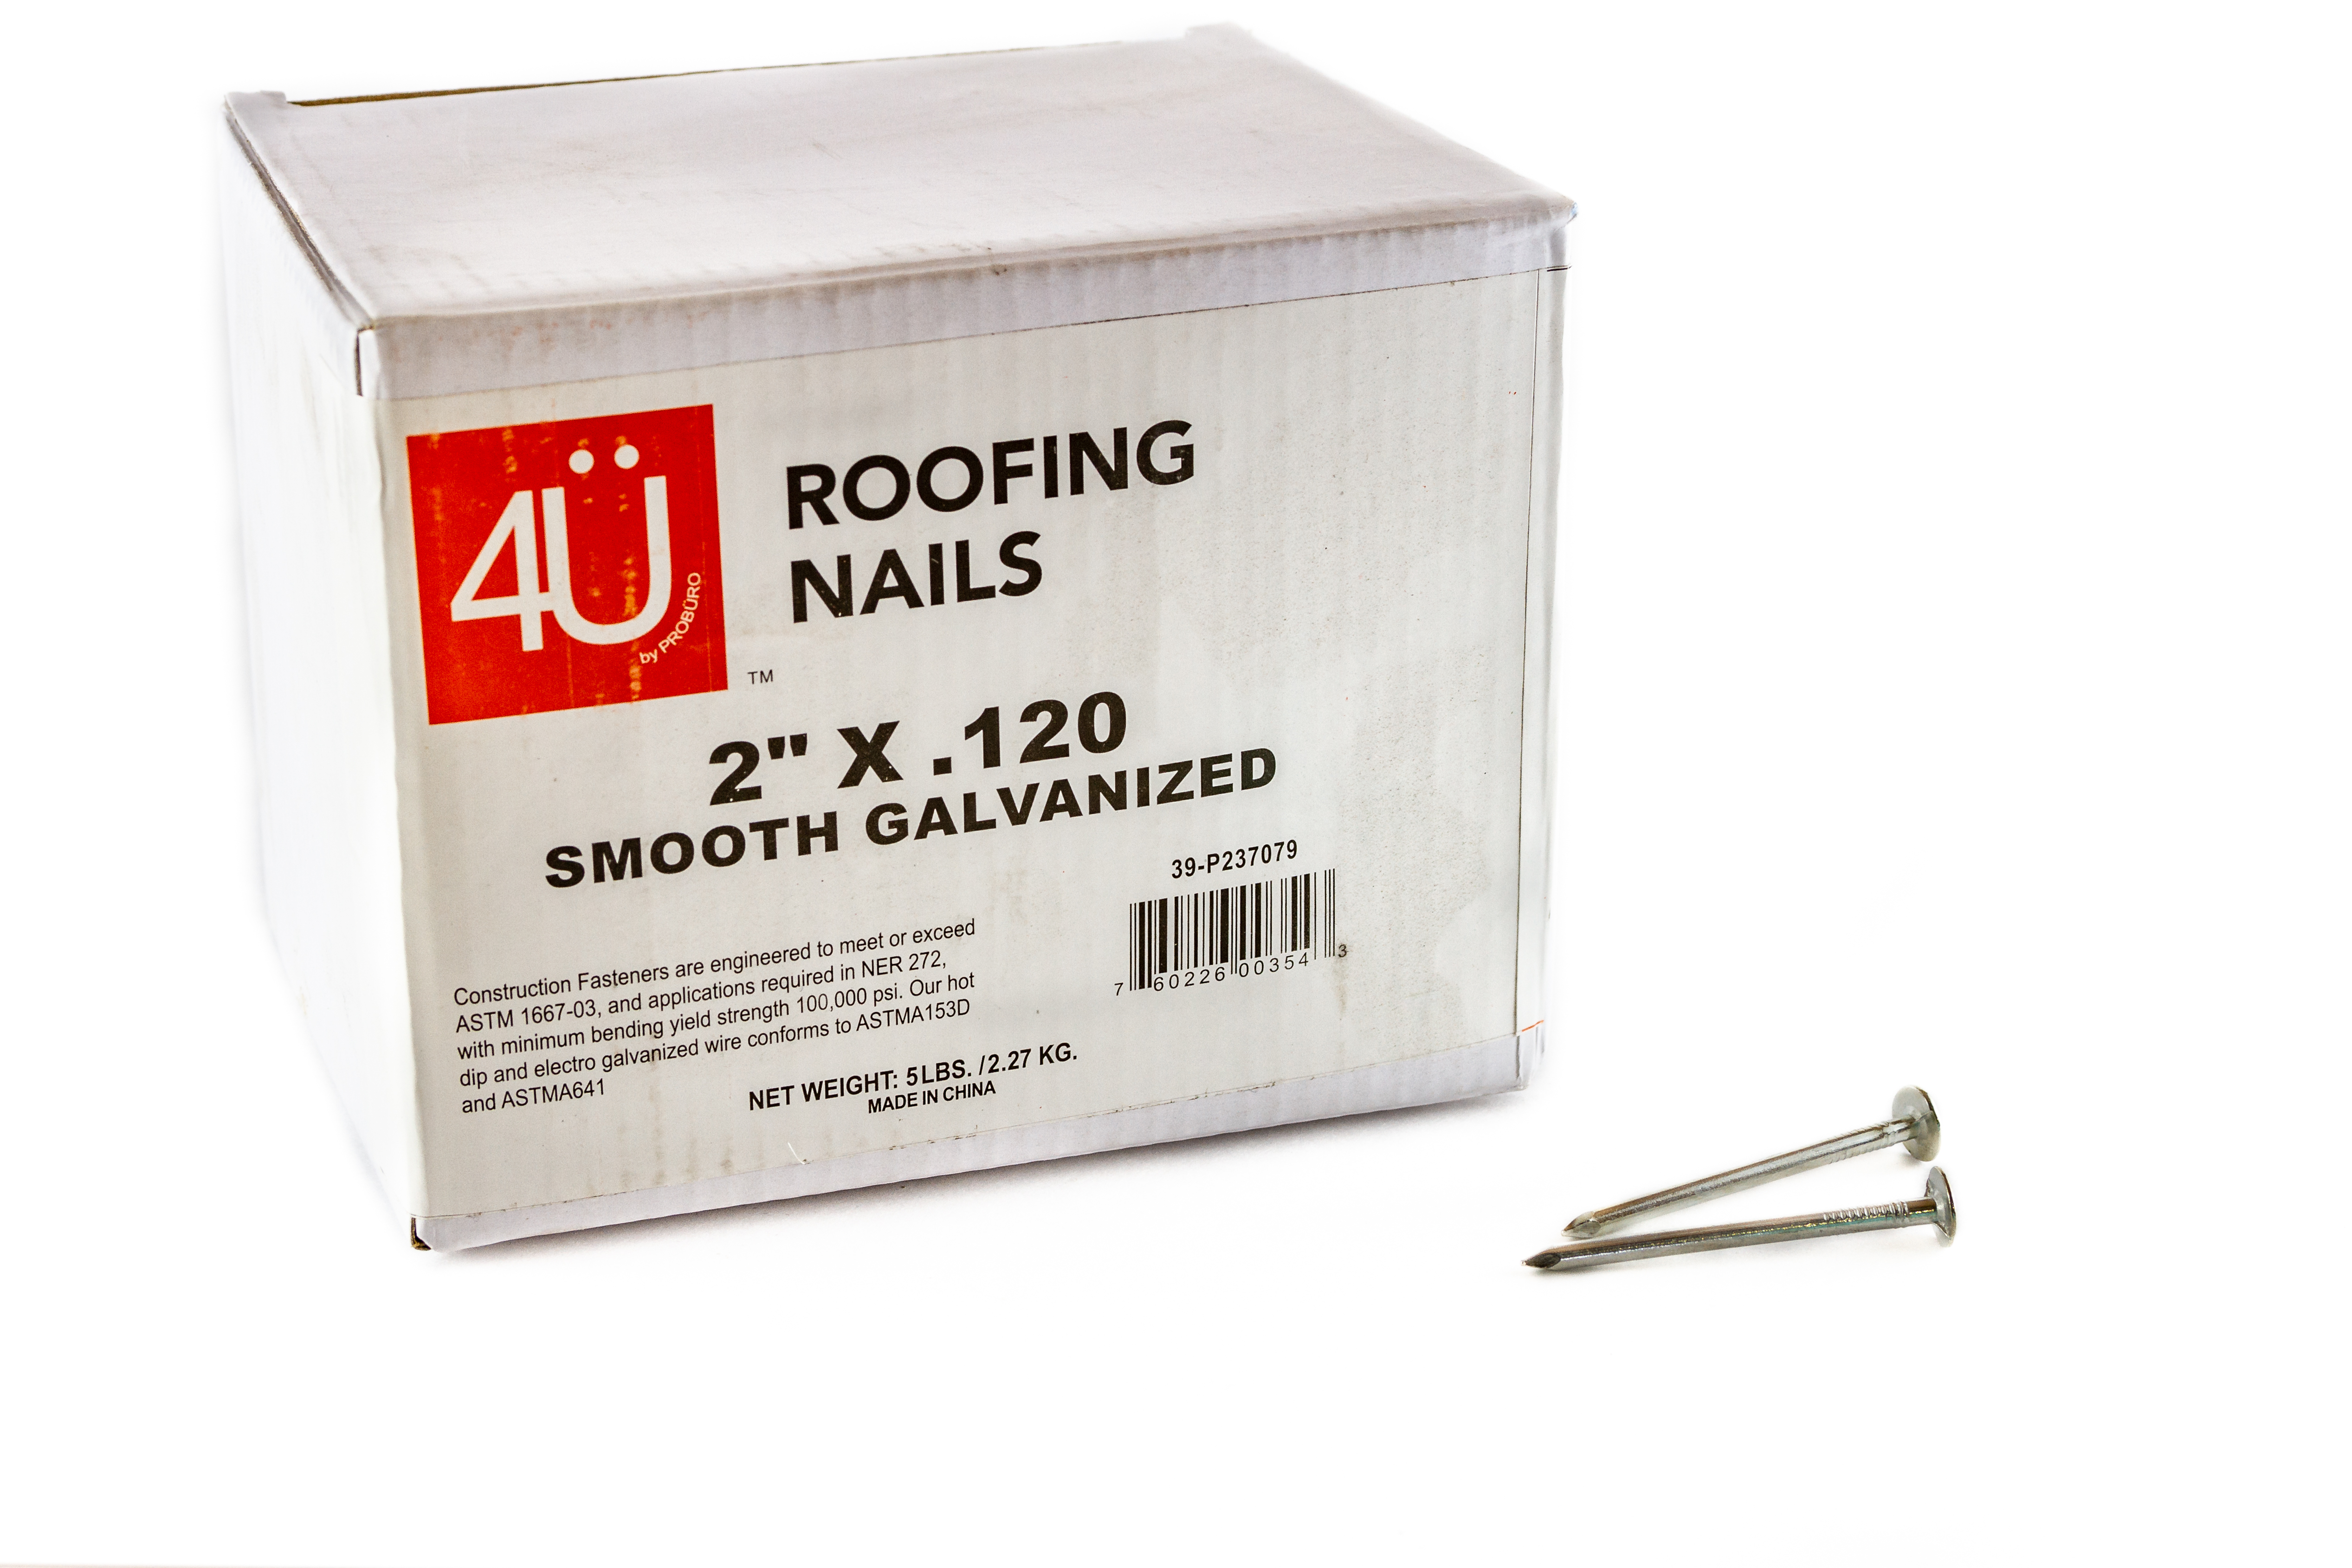 ROOFING NAILS |